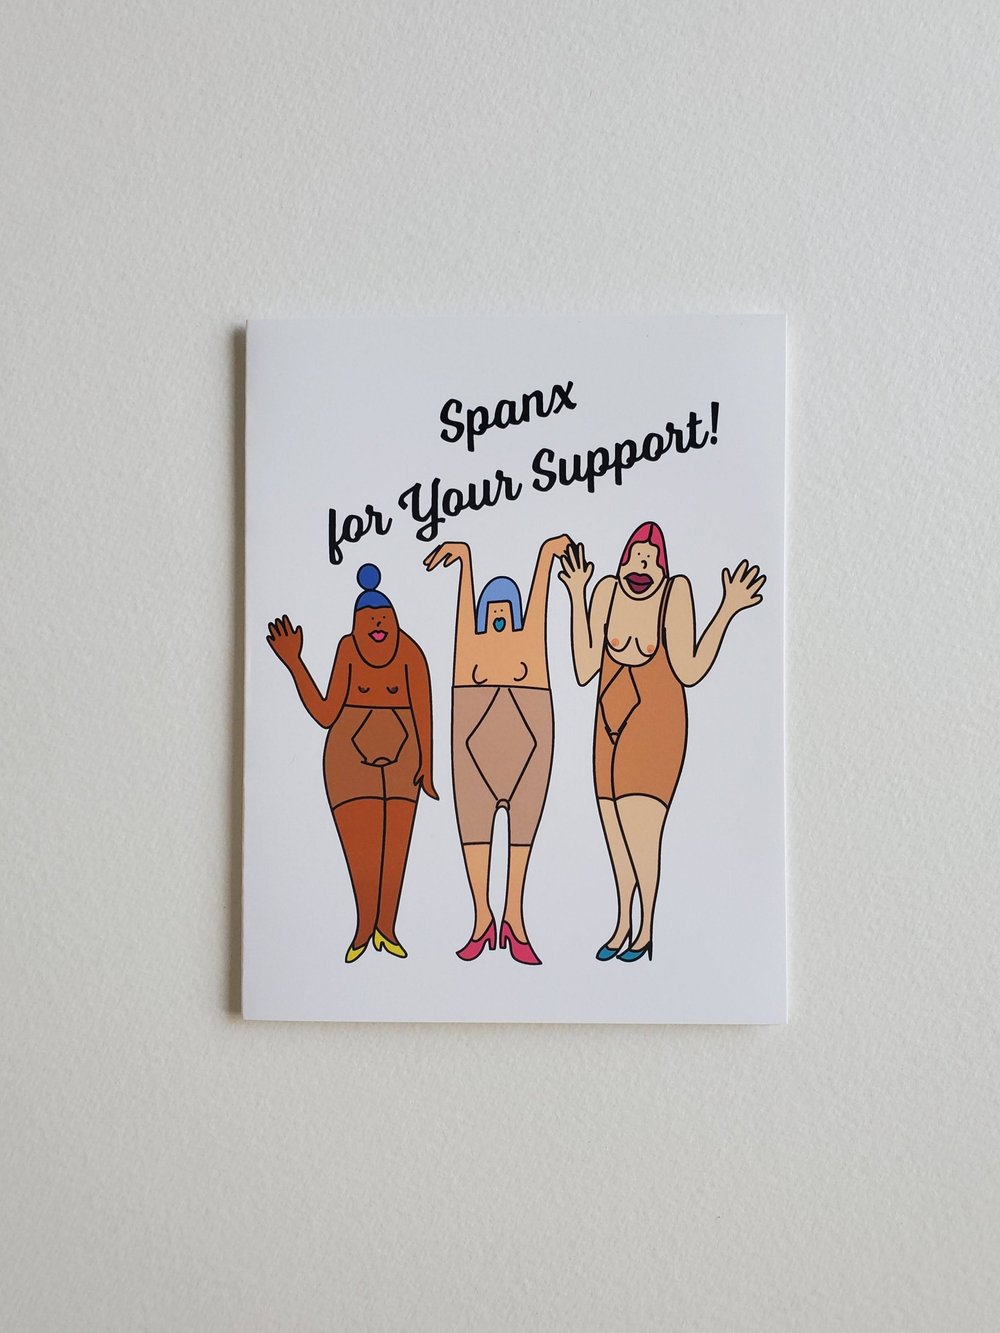 Spanx for Your Support — HARMONY ART